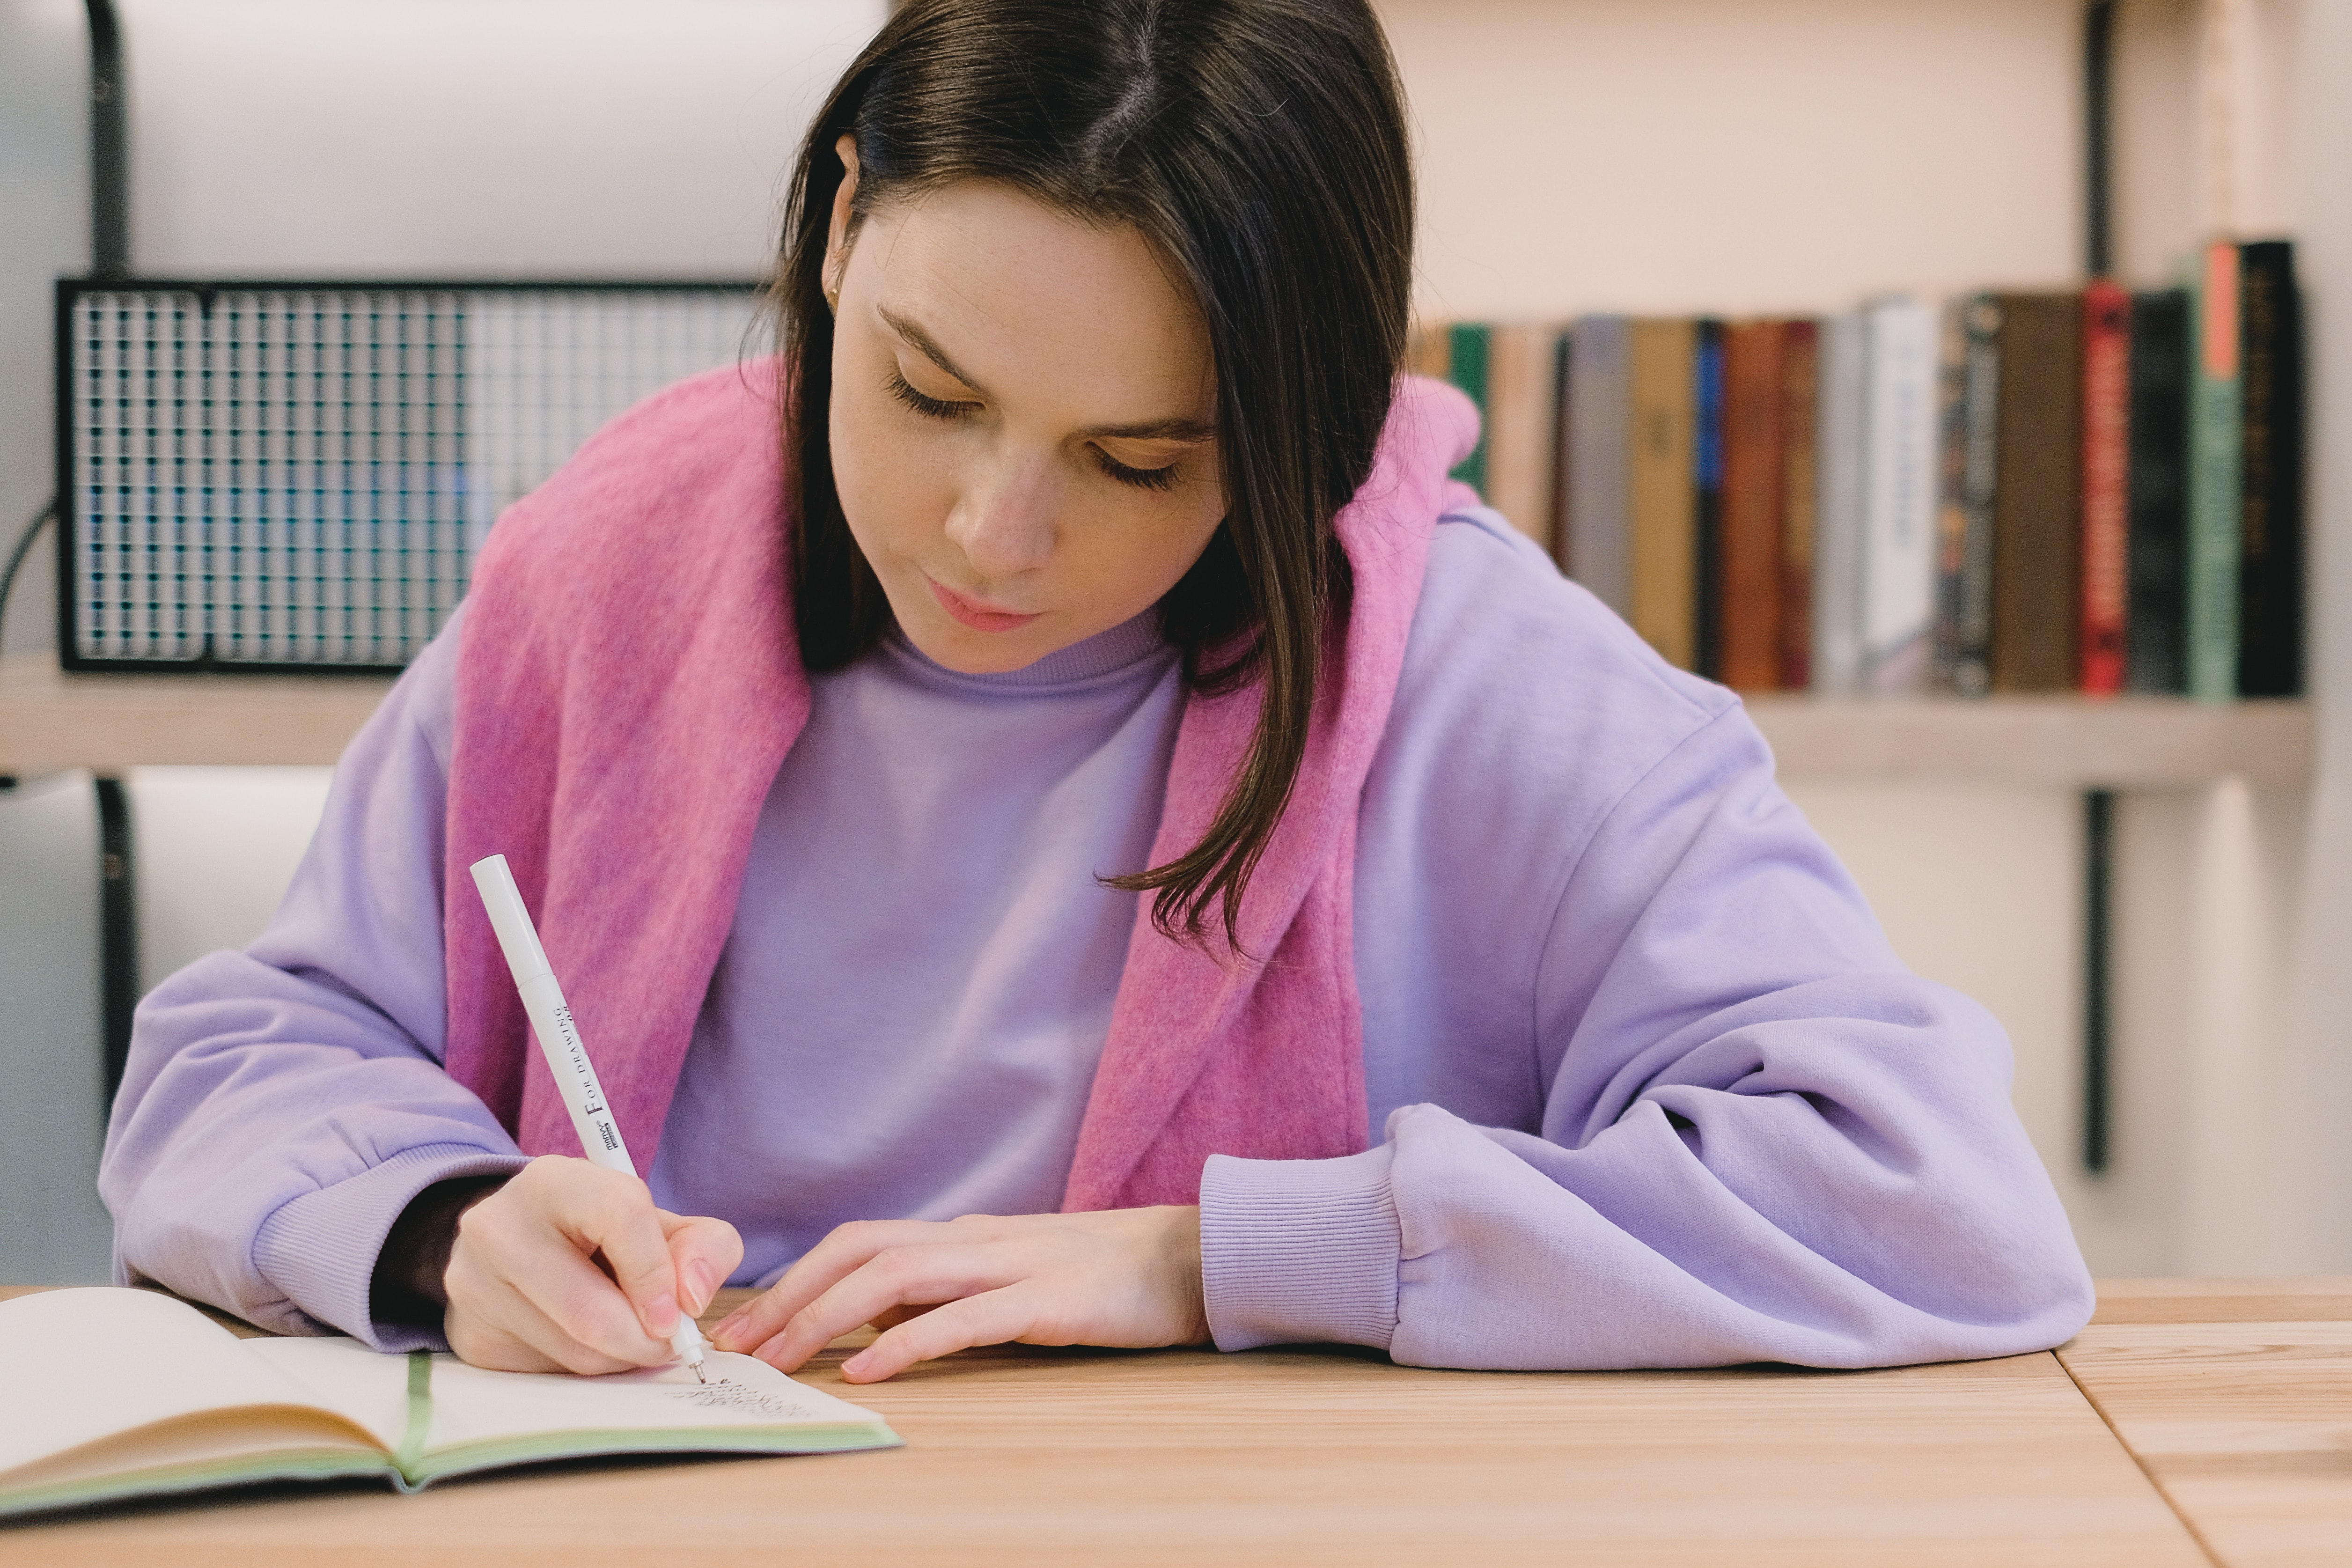 A teenaged girl with dark hair and light skin studiously writes in a notebook. She is wearing a light purple sweater and pink scarf.